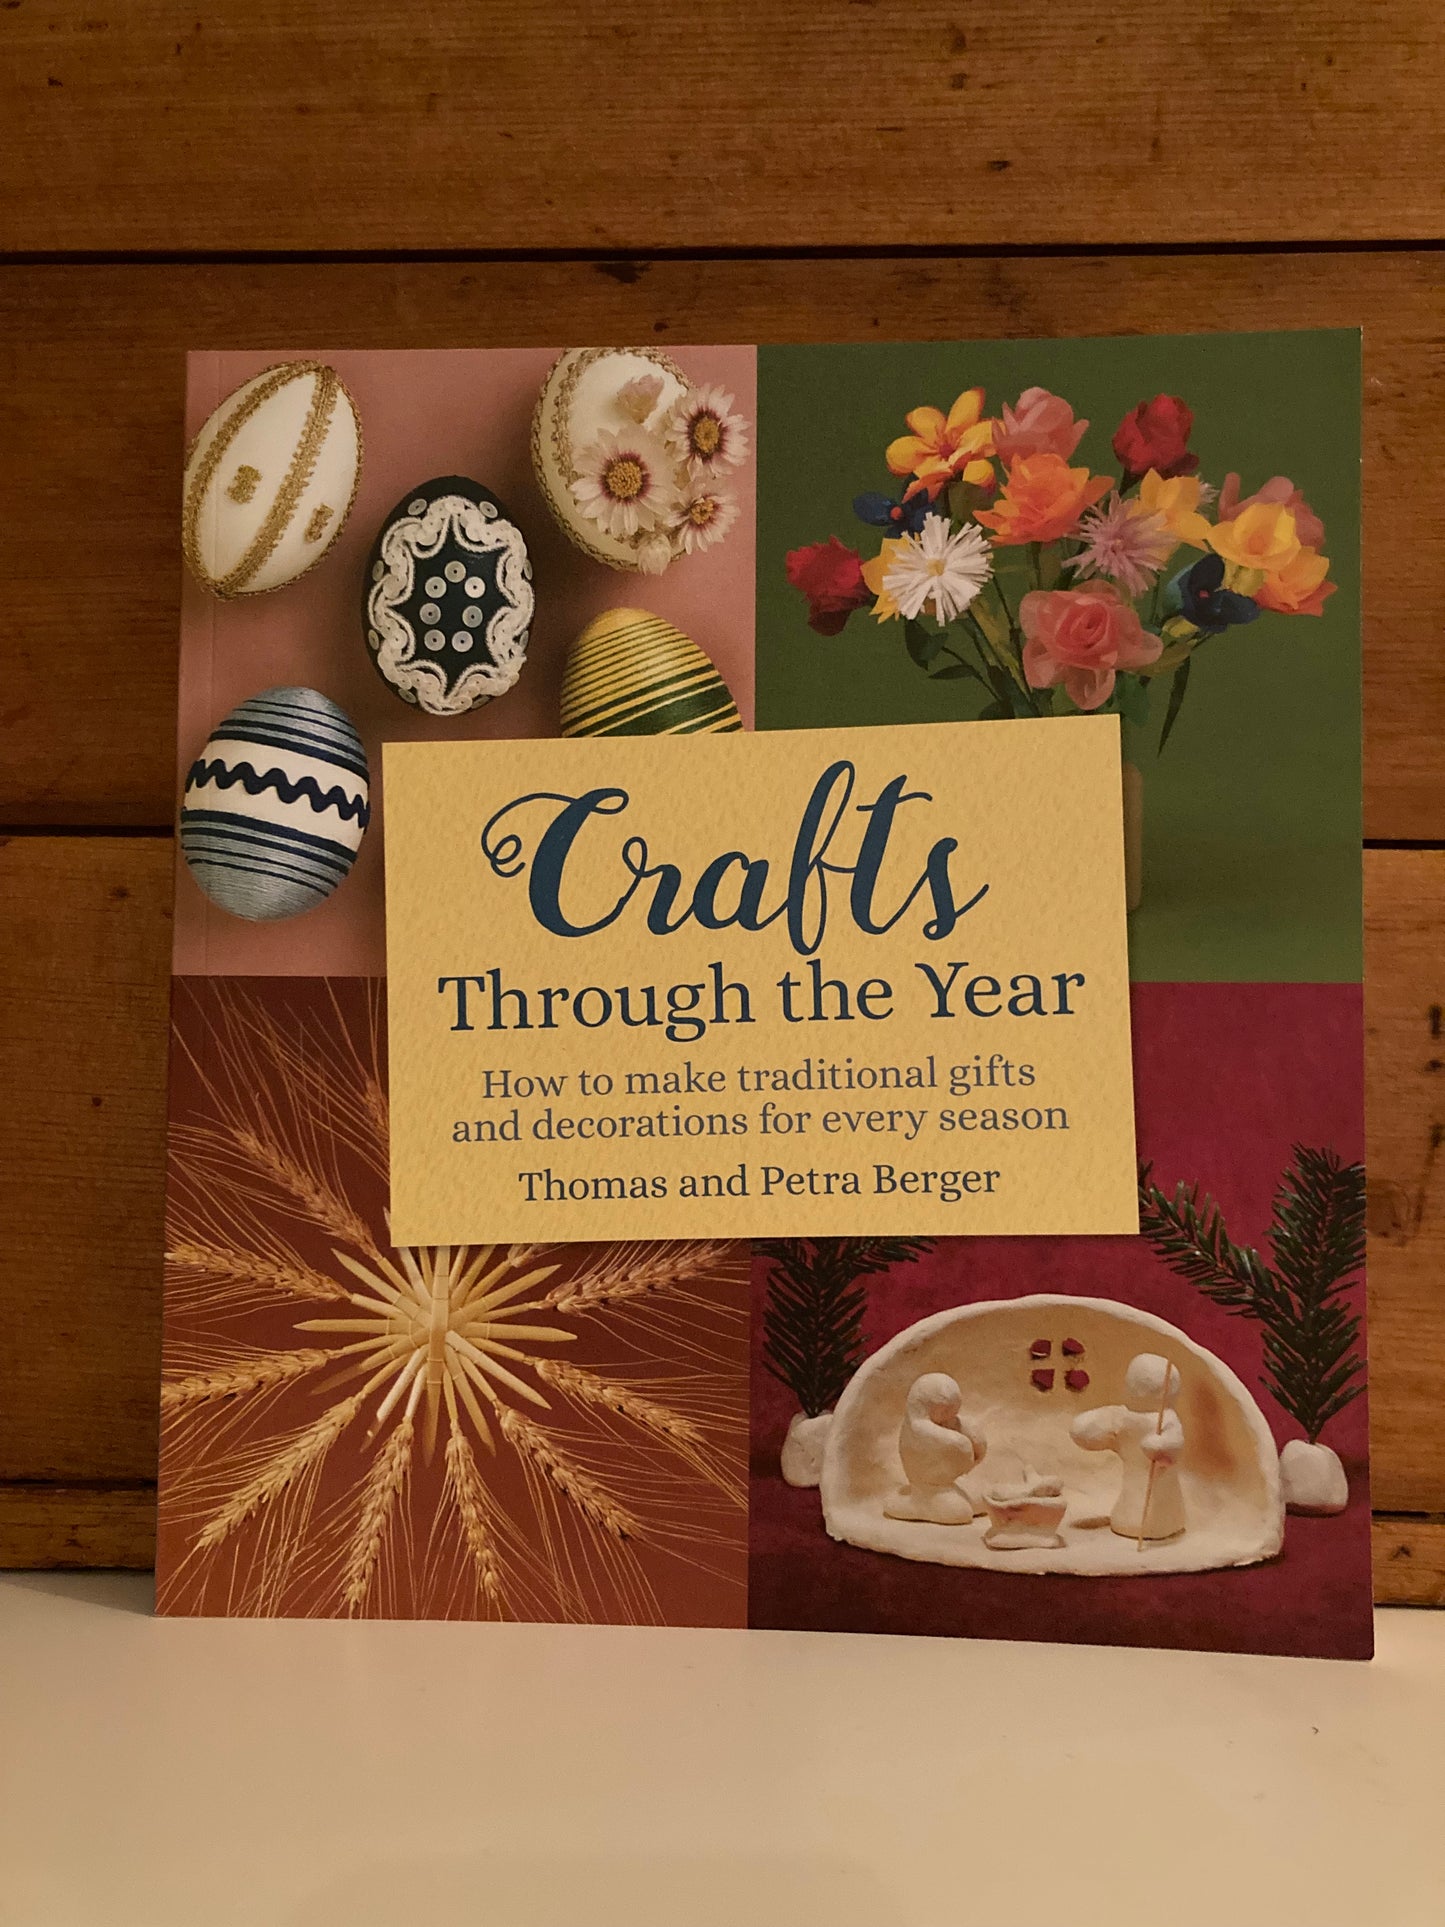 Crafting Resource Book - CRAFTS THROUGH THE YEAR